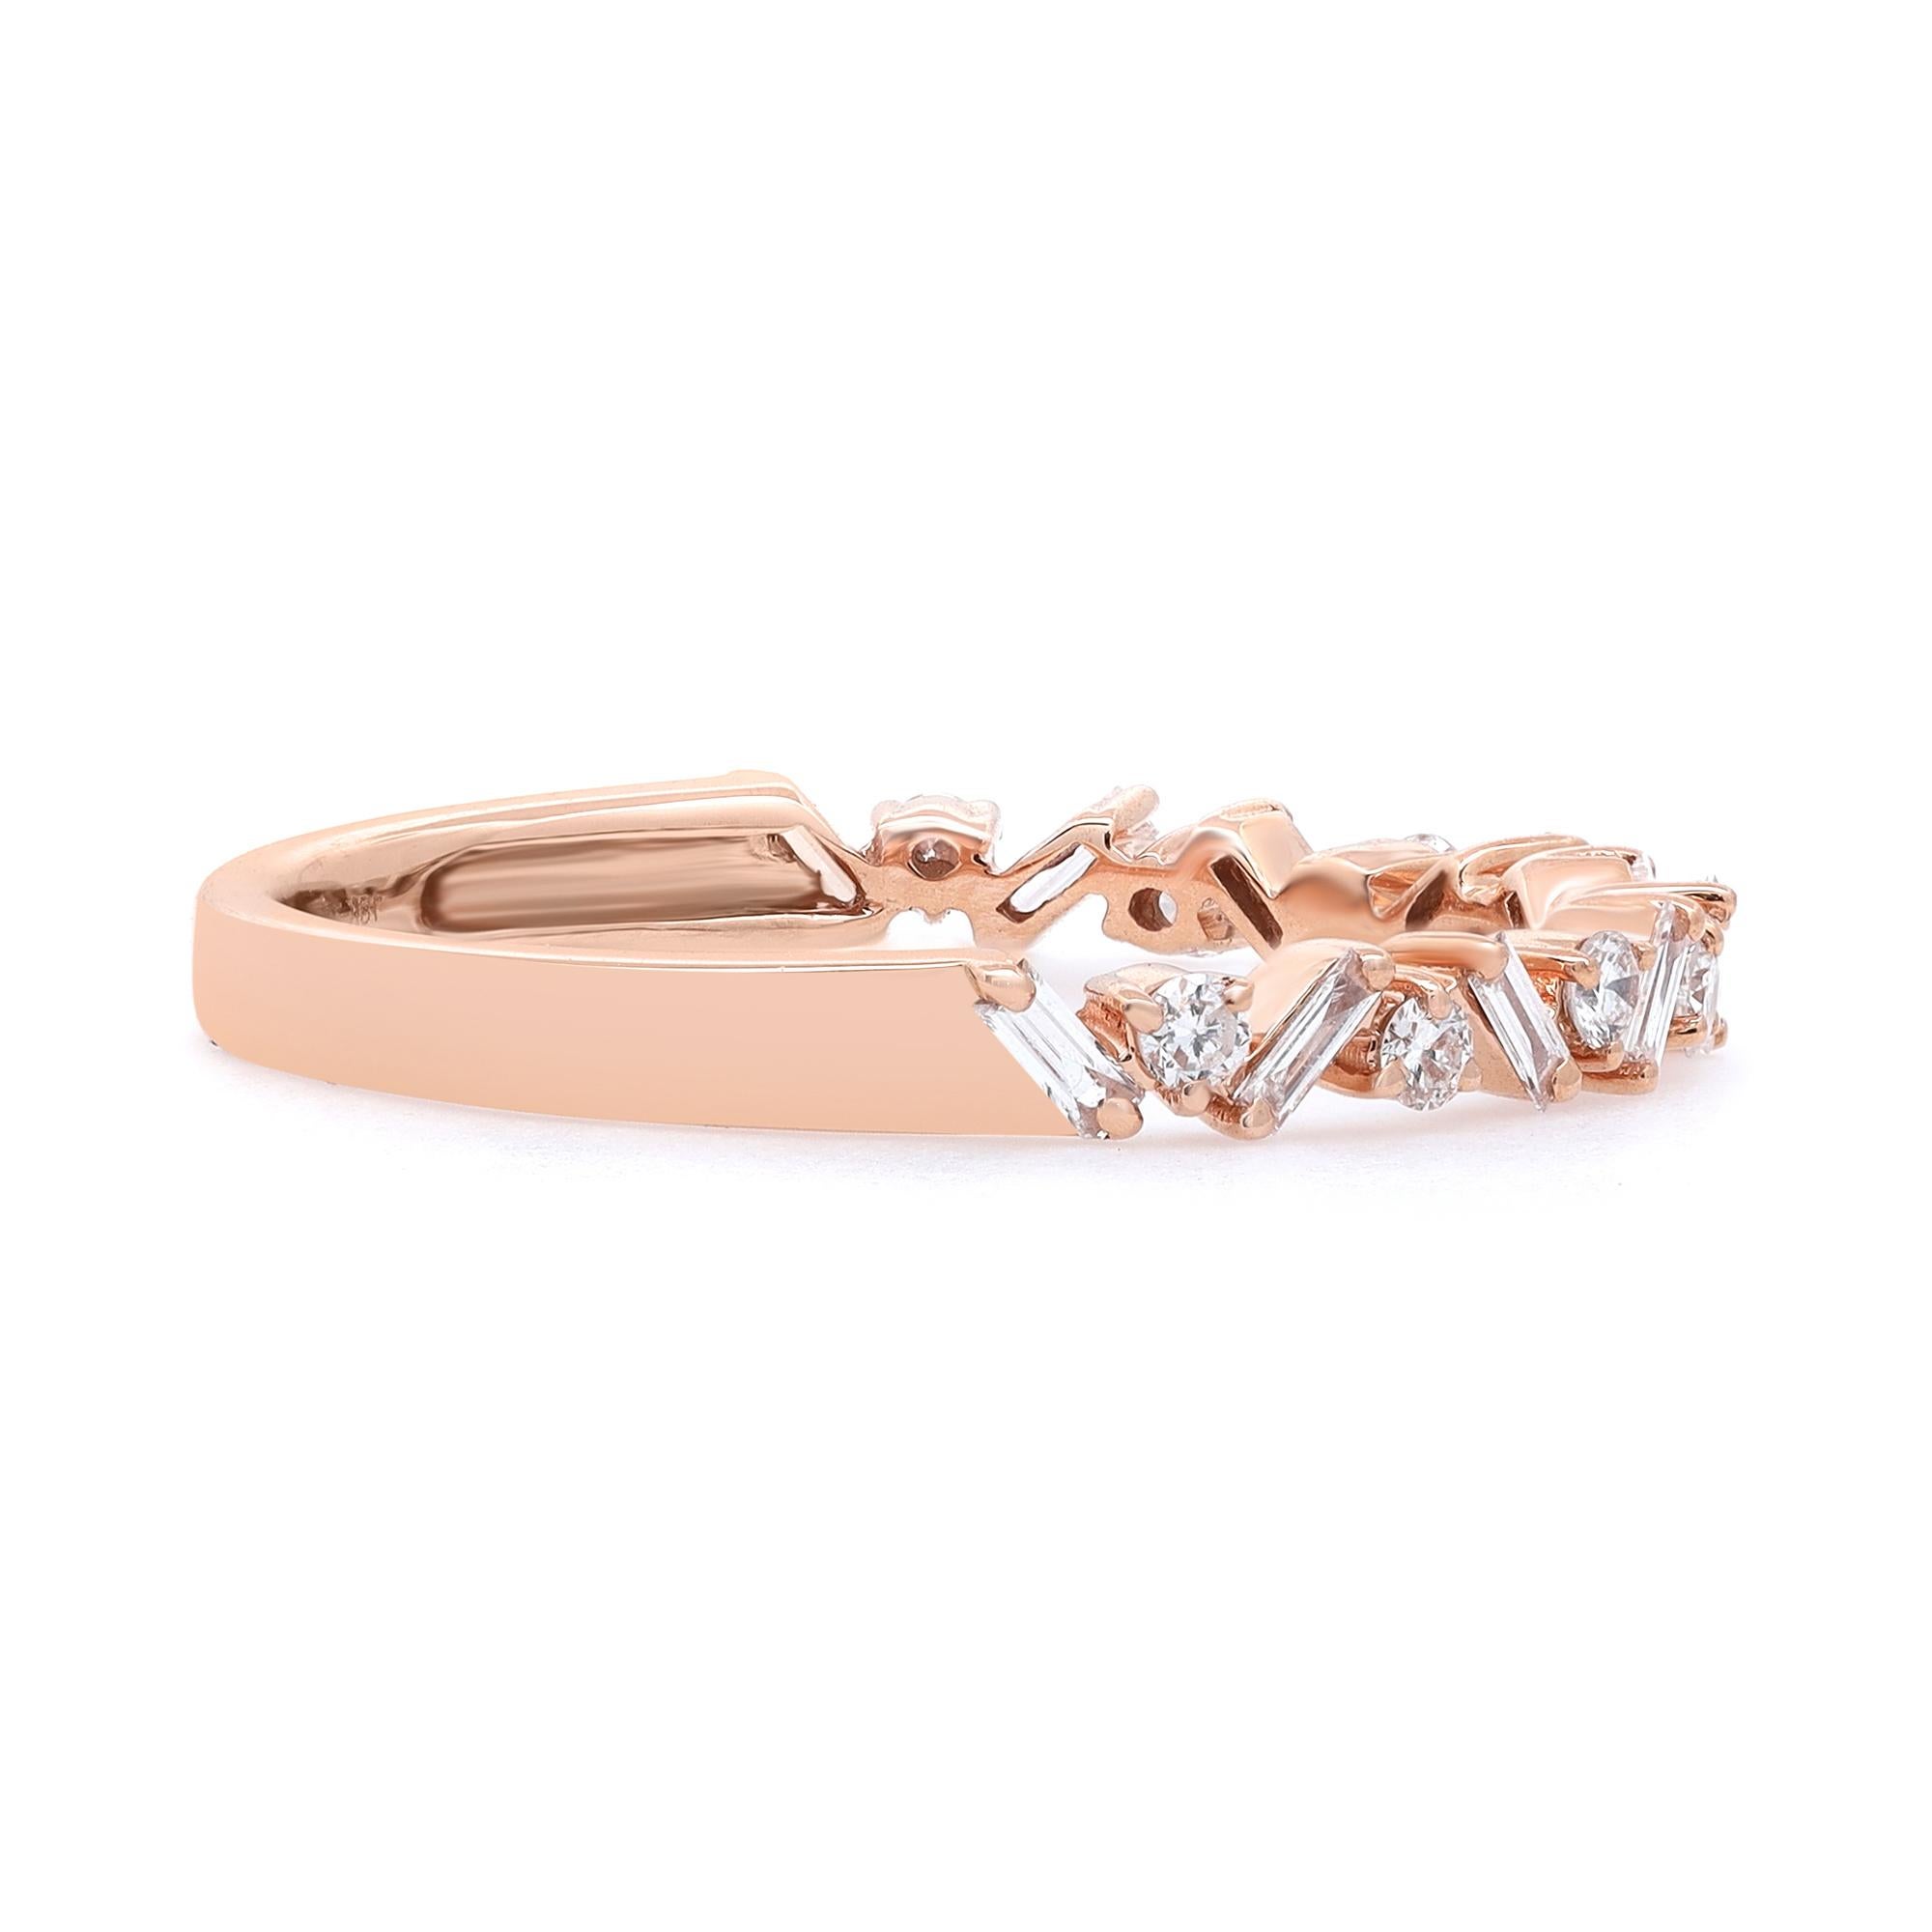 Simple and delicate diamond ring crafted in 18k rose gold. This ring features prong set baguette cut diamonds set in a zig-zag pattern portraying a timeless, eye-catching style. It's stackable and easy to mix and match. Total diamond weight: 0.30ct.